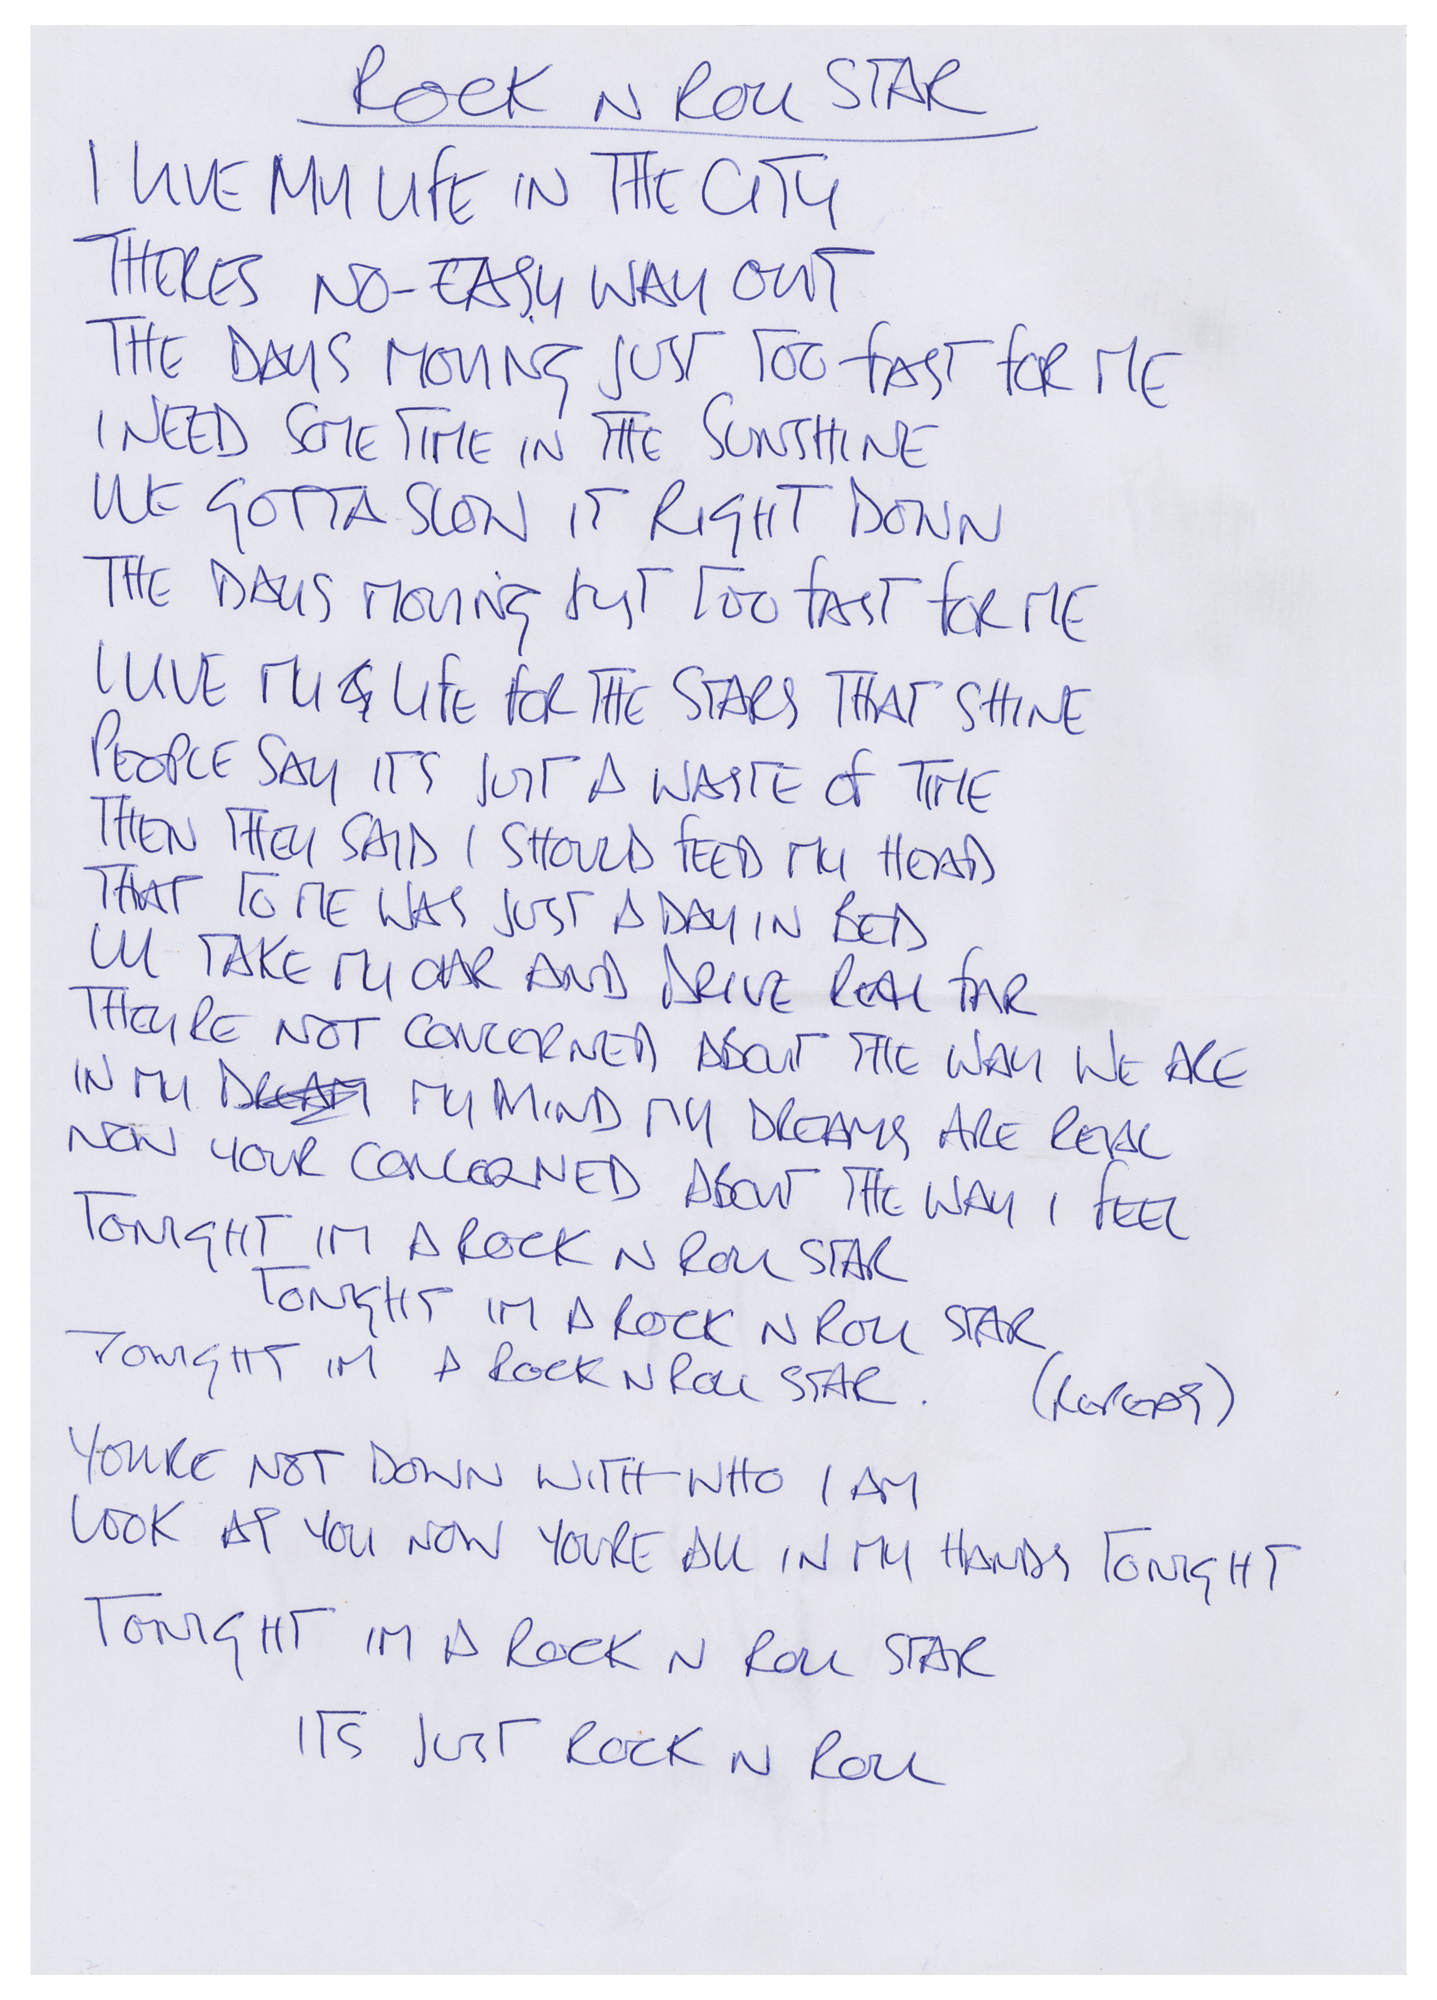 Lot #628 Oasis: Noel Gallagher Handwritten Lyrics (13) for Definitely Maybe, with CD Signed by the Gallagher Brothers - Image 7